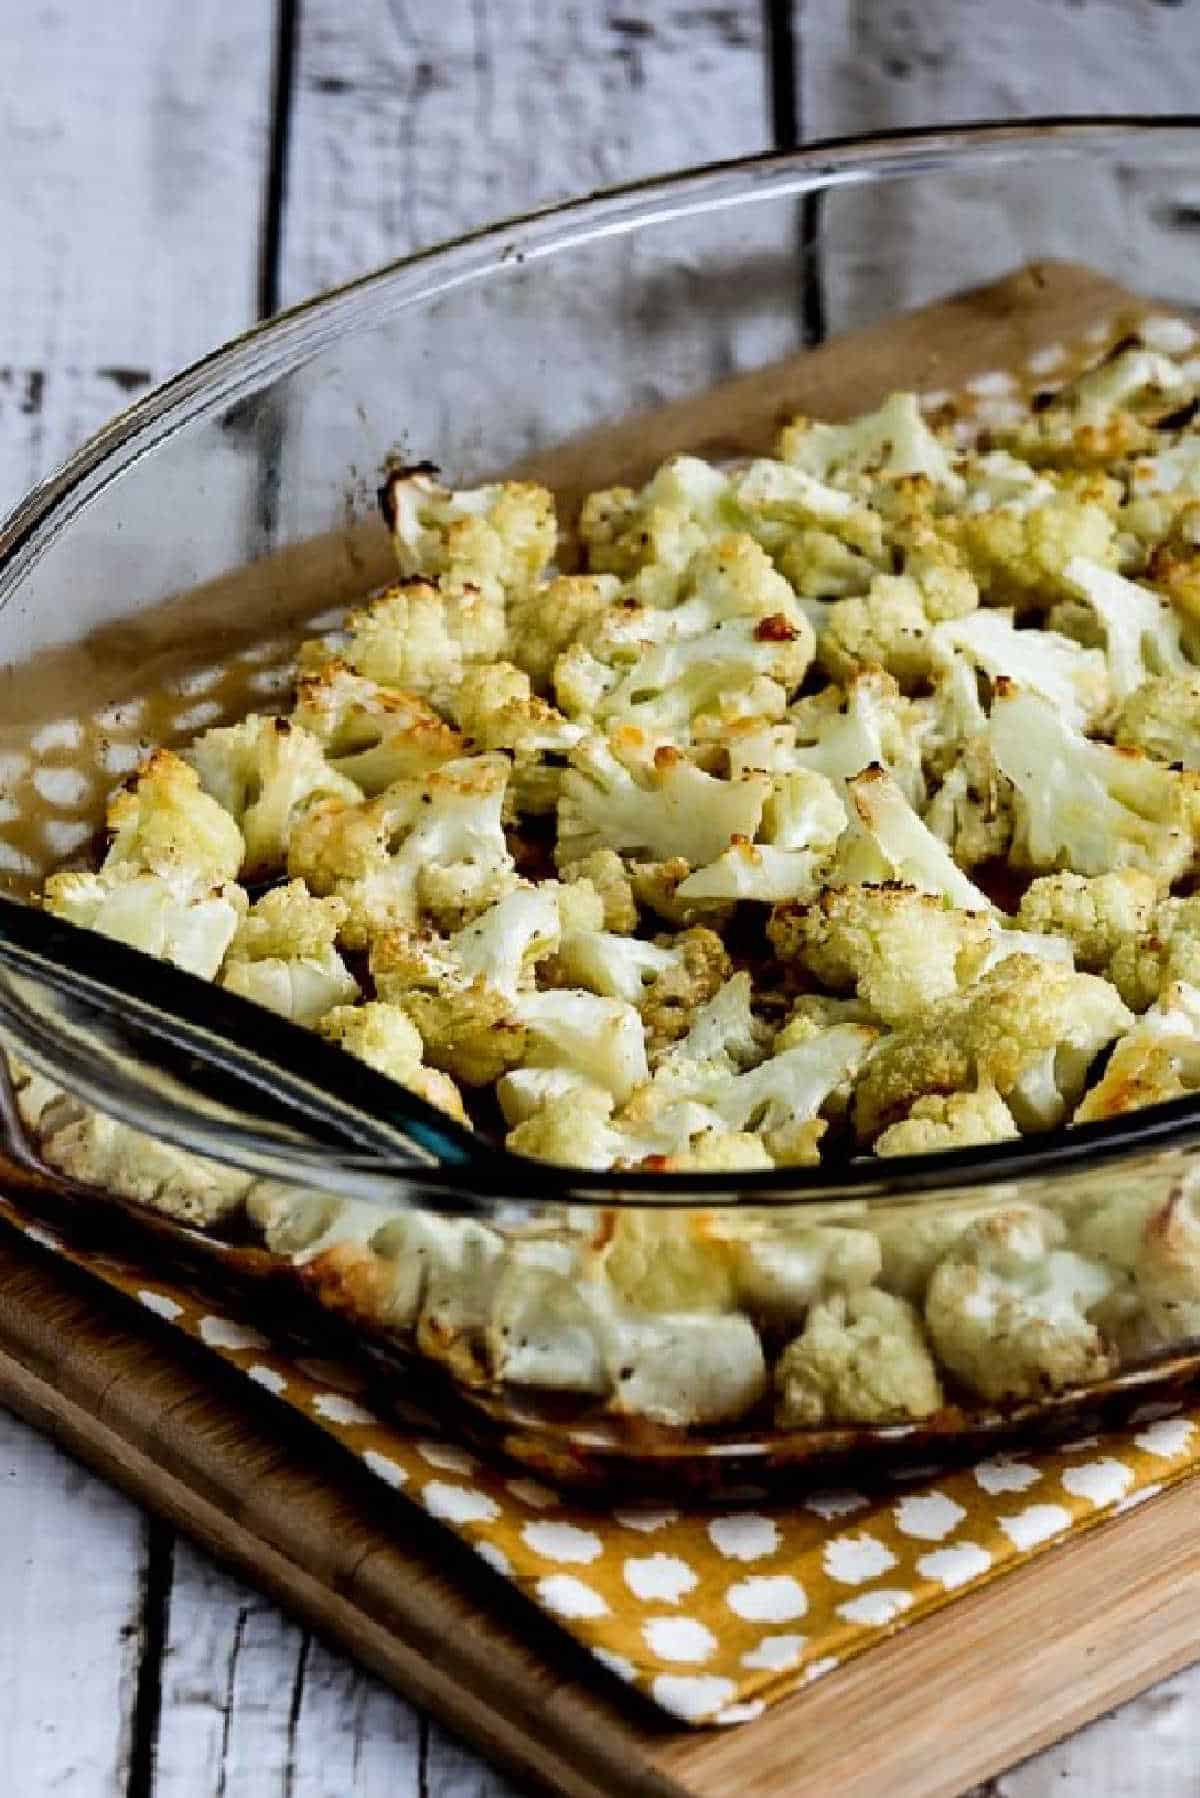 Roasted cauliflower with parmesan cheese in baking dish on napkin and cutting board